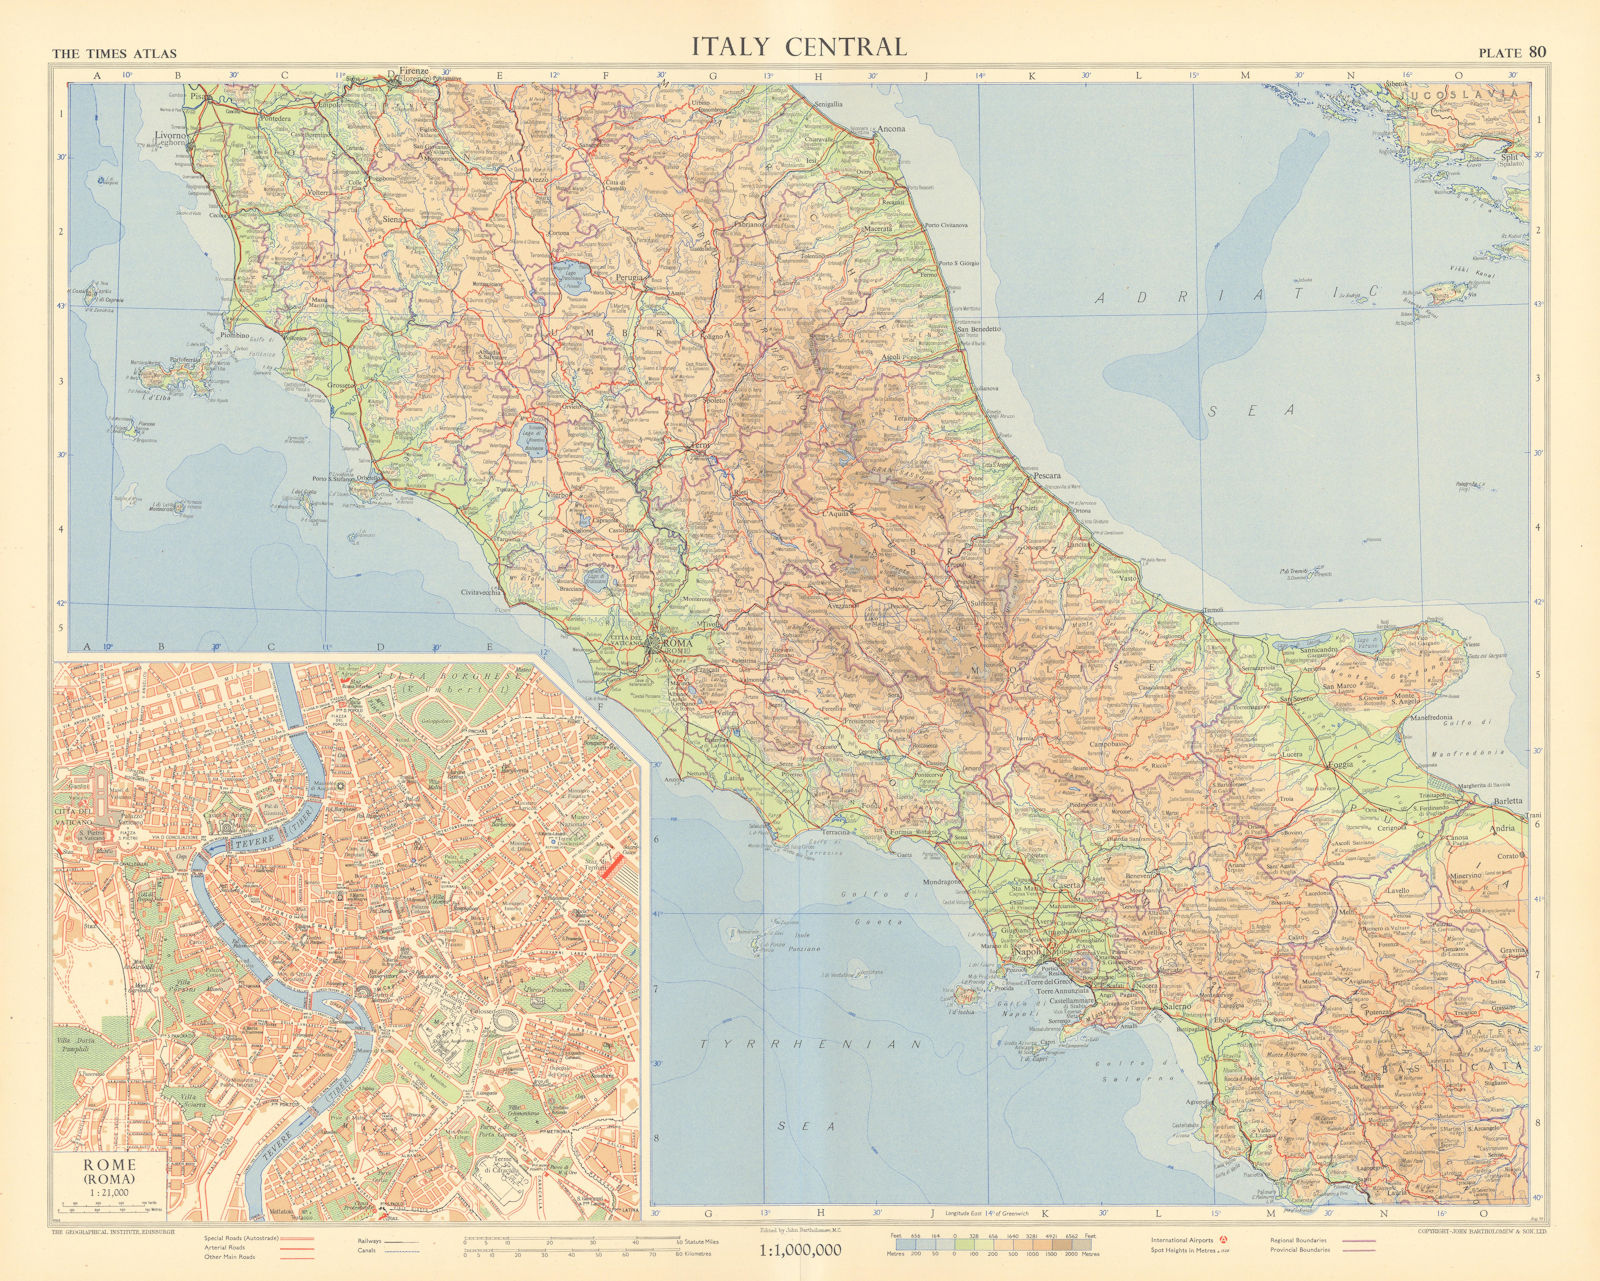 Associate Product Italy central. Rome plan. Road network Autostrade. TIMES 1956 old vintage map